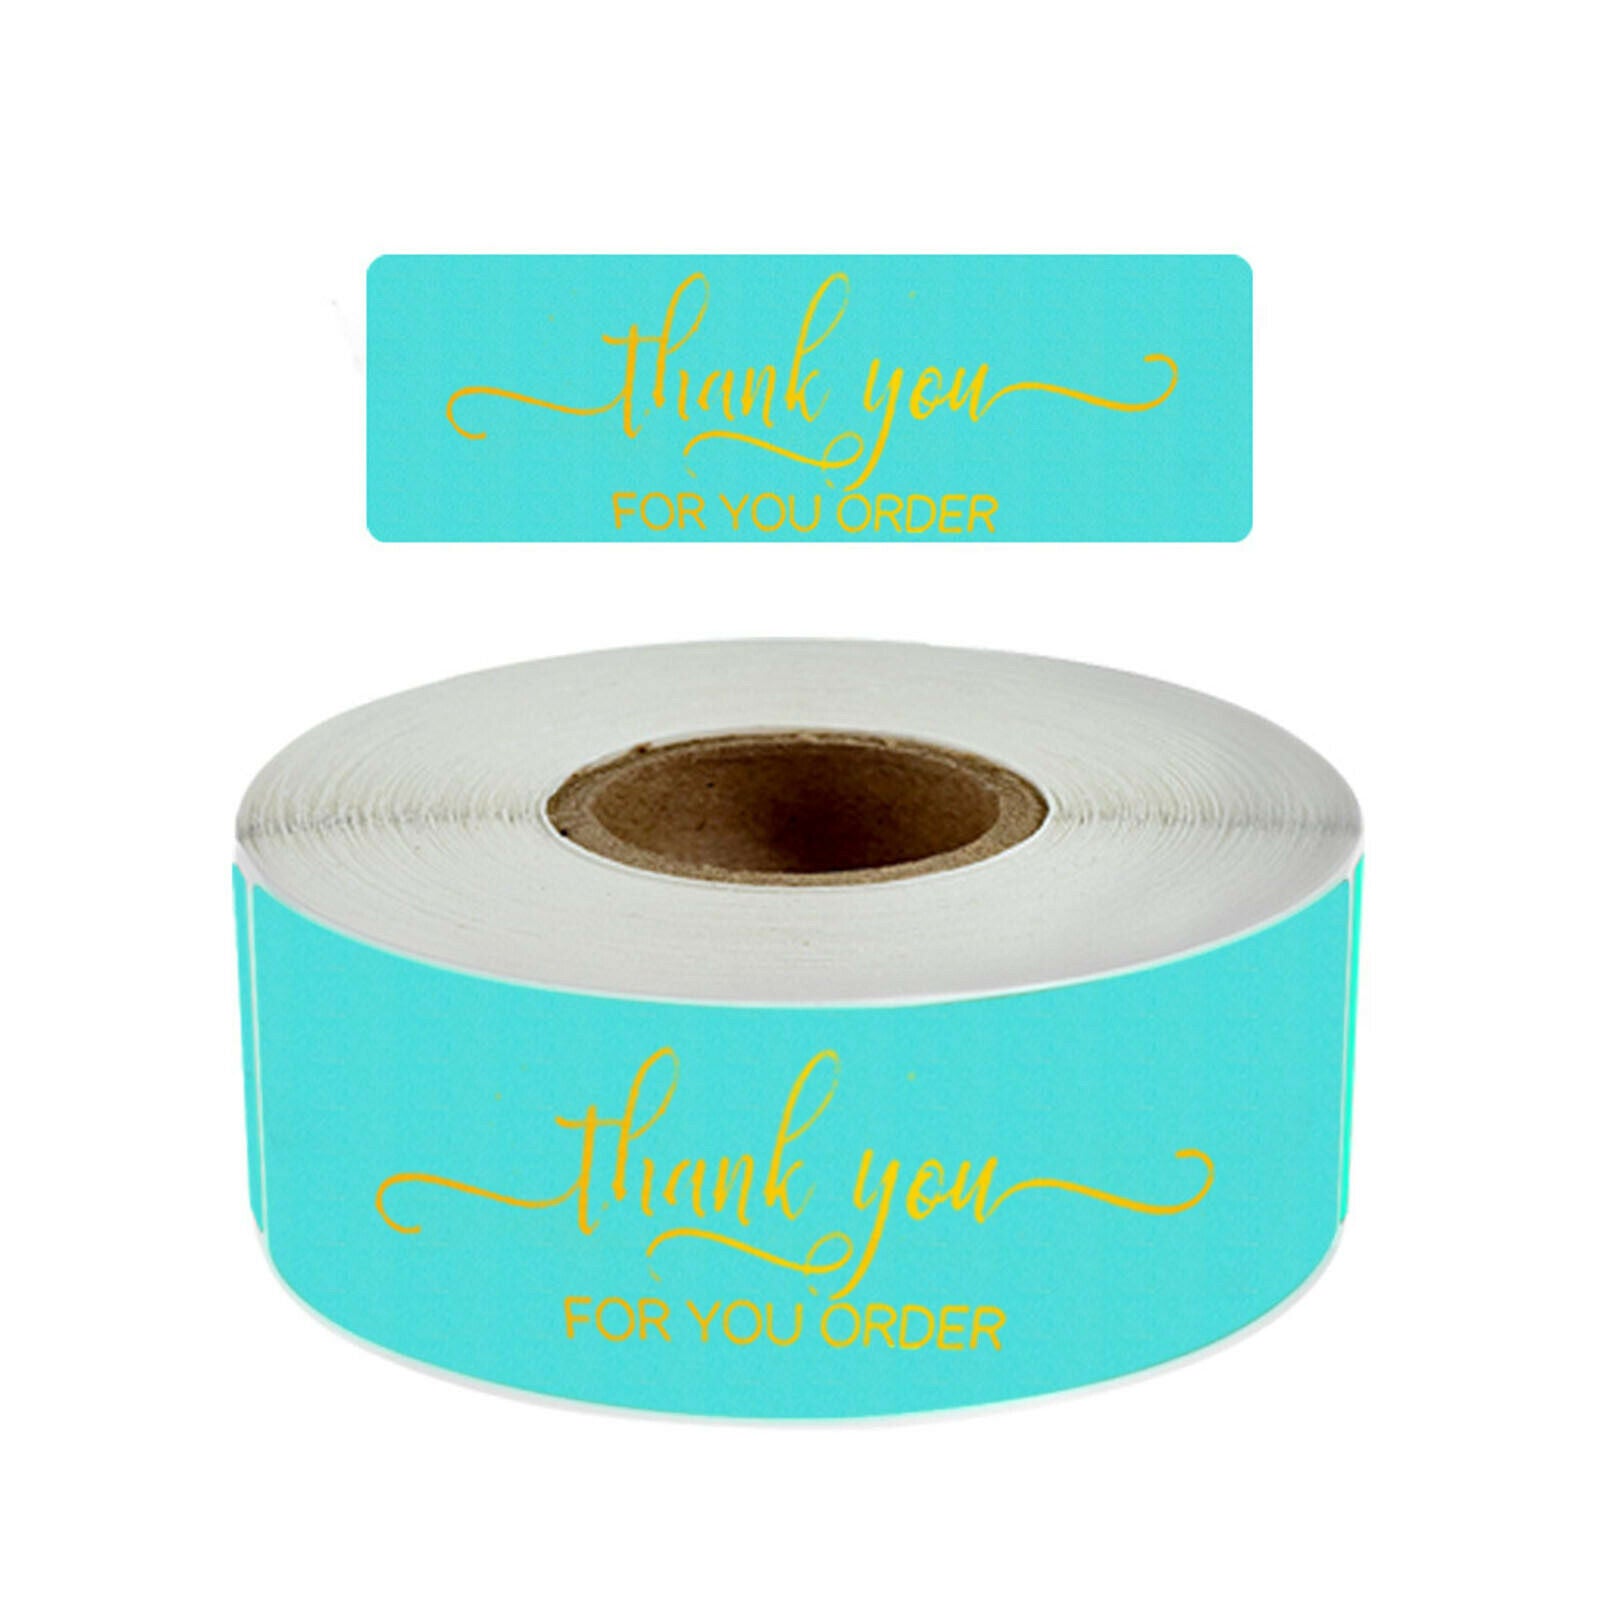 Thank You for Your Order Stickers Labels for Small Business Owners